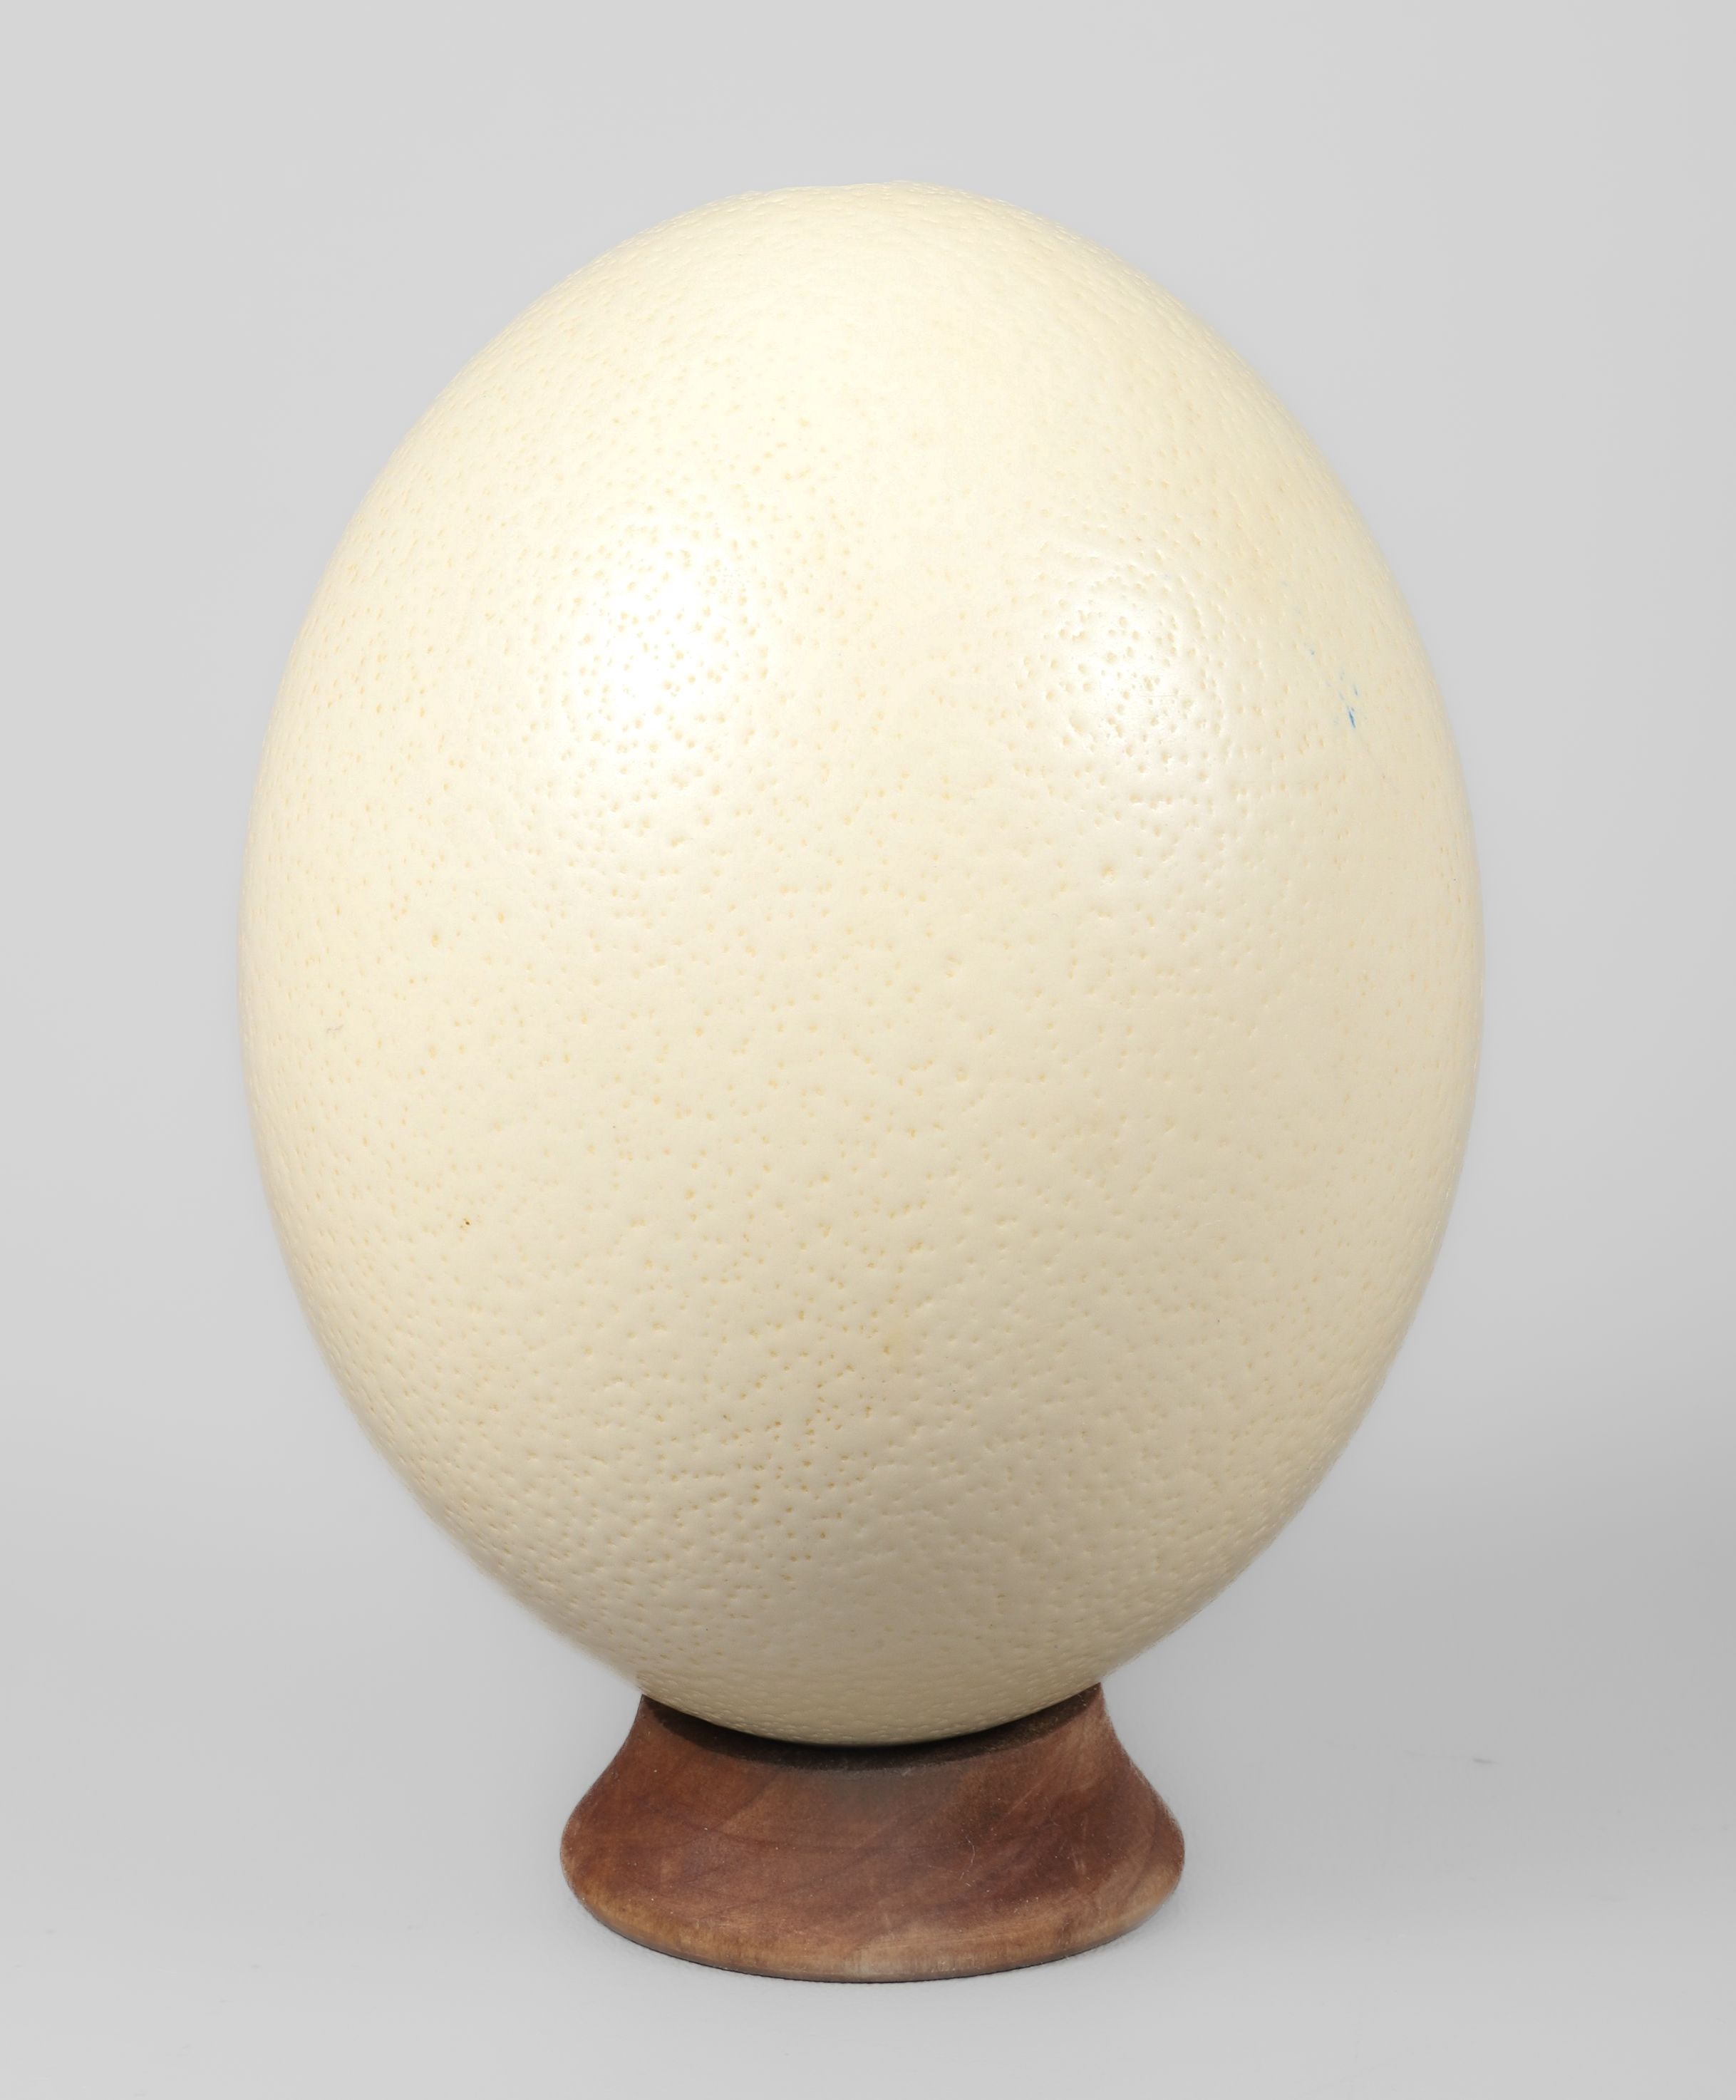 Ostrich egg with wood stand, 7 h overall